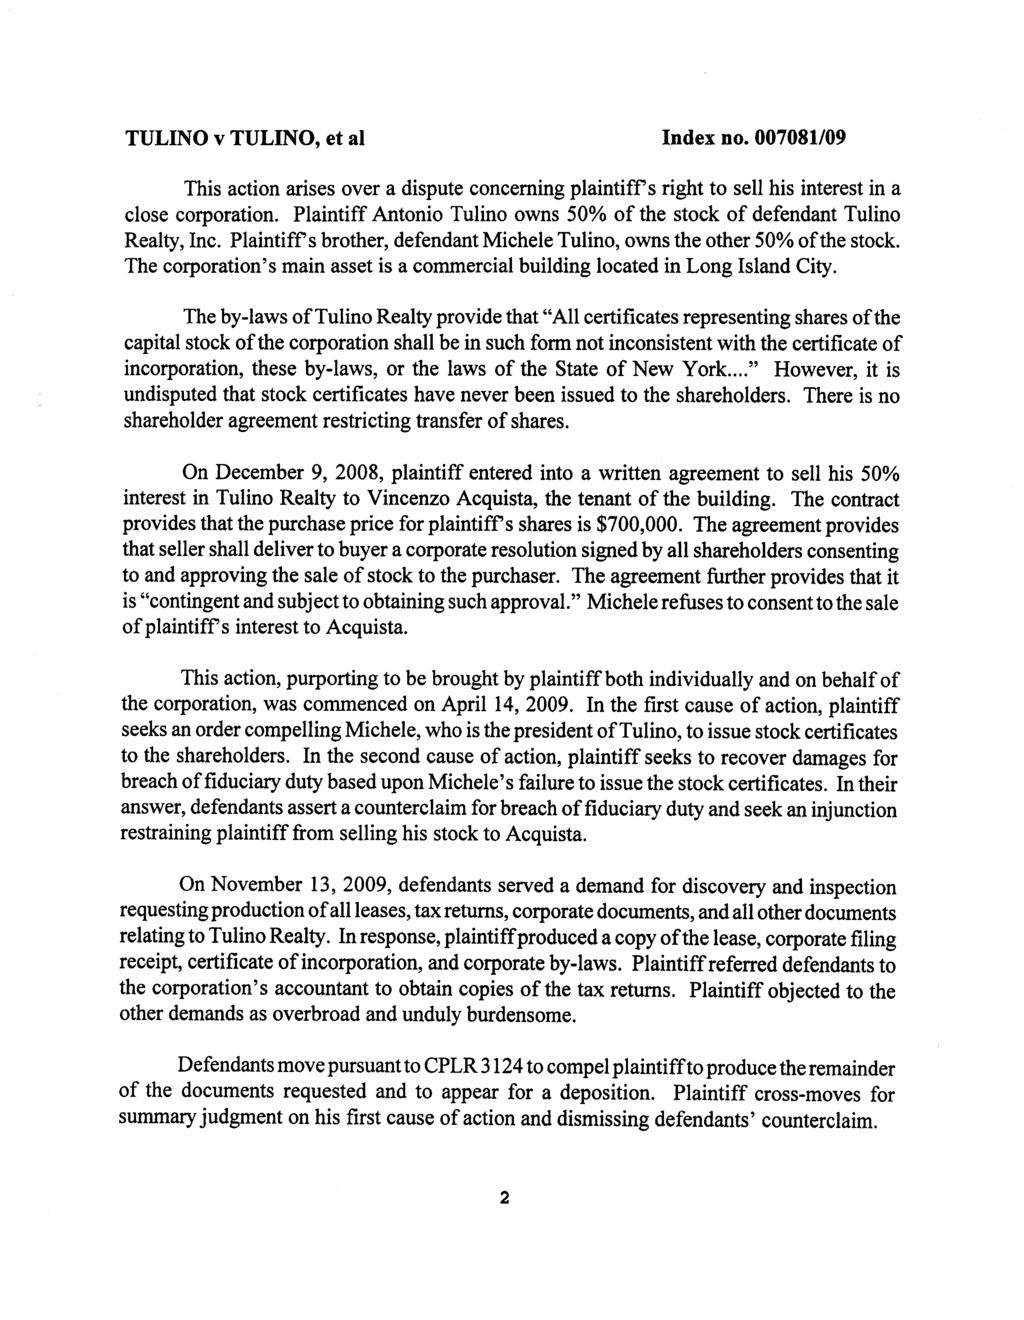 [* 2] This action arises over a dispute concerning plaintiffs right to sell his interest in a close corporation. Plaintiff Antonio Tulino owns 50% of the stock of defendant Tulino Realty, Inc.